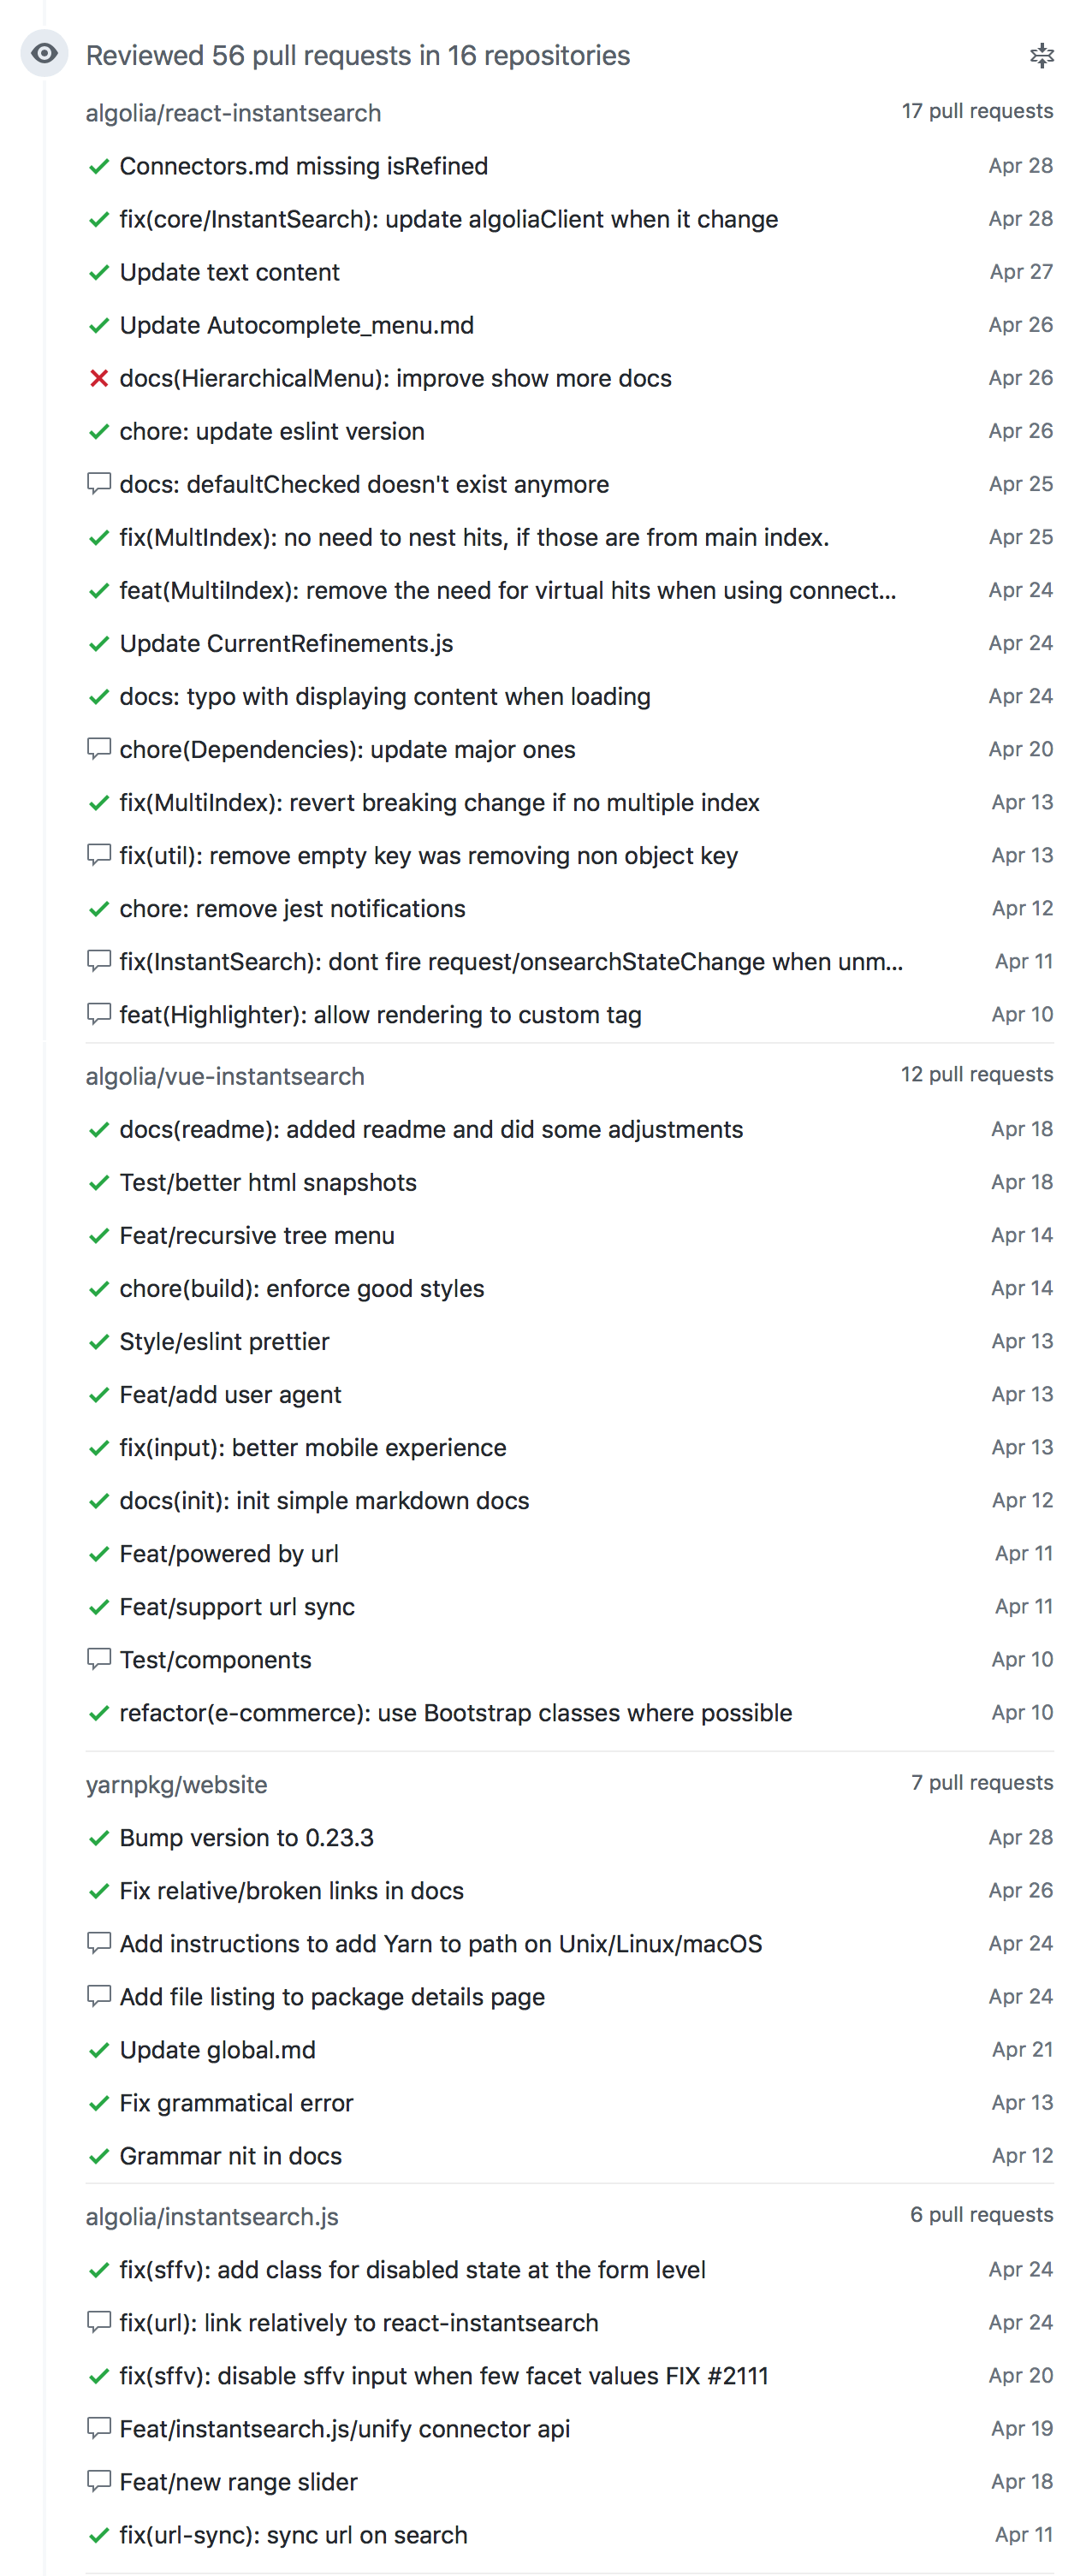 Pull requests reviewed by me